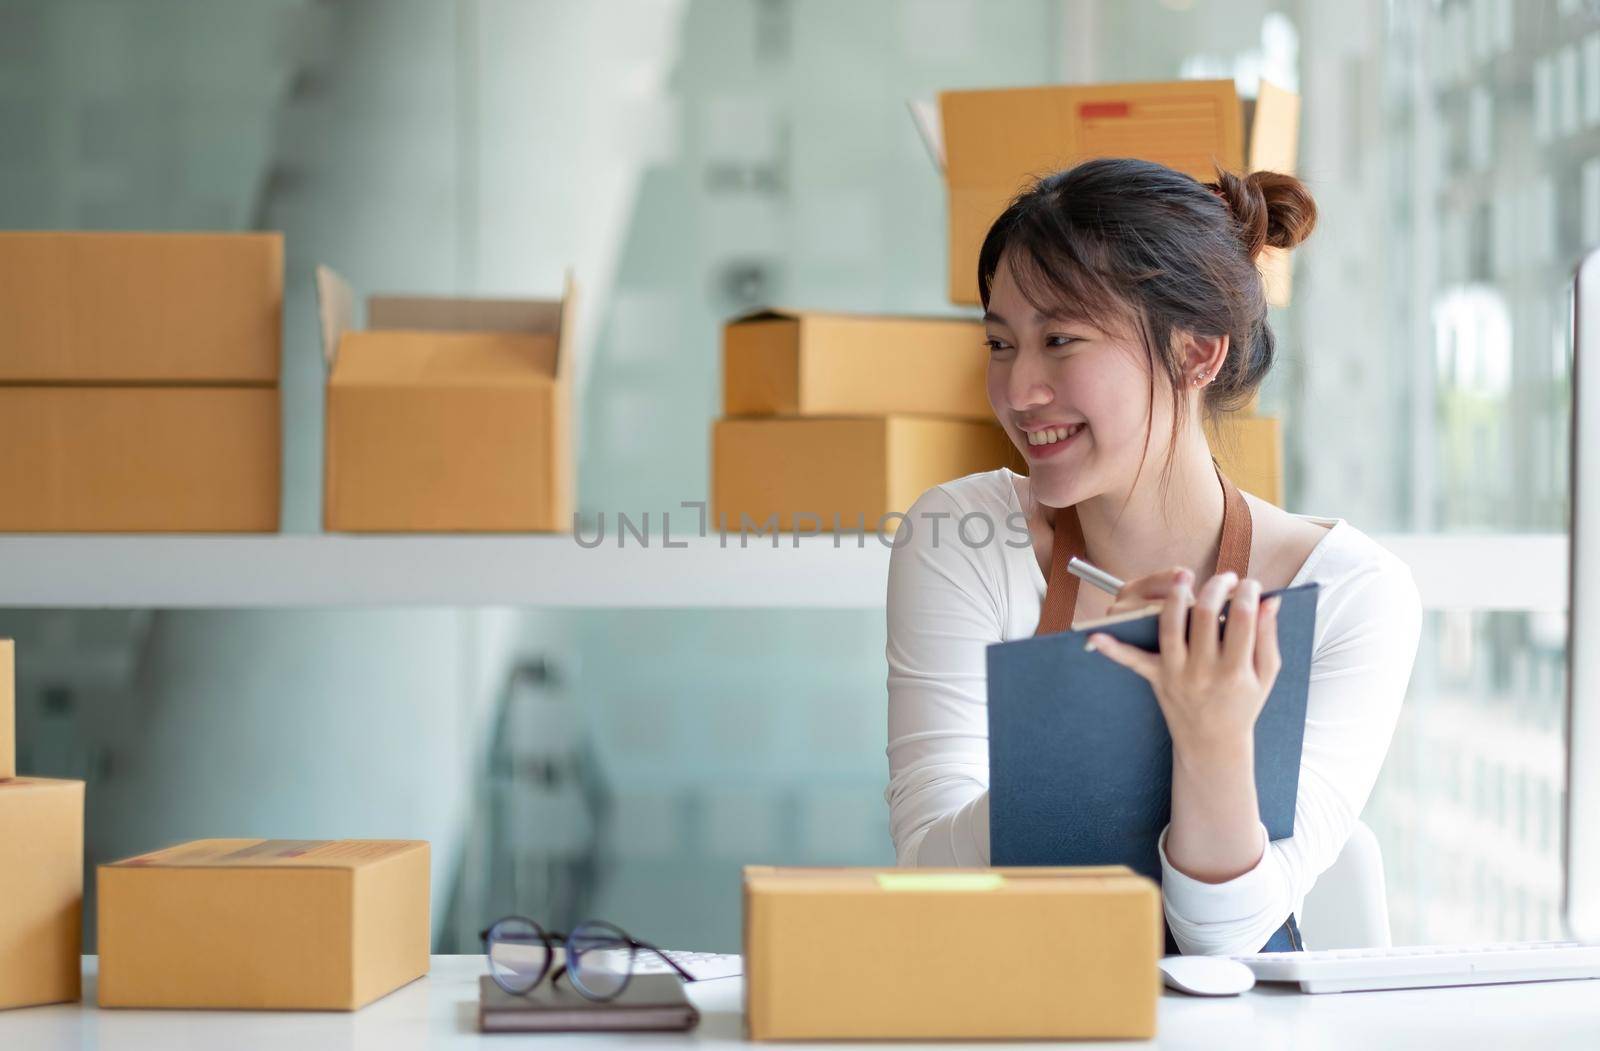 Starting small businesses SME owners female entrepreneurs Use a laptop or notebook to receive and review orders online to prepare to pack boxes, sell to customers, SME online business ideas. by wichayada